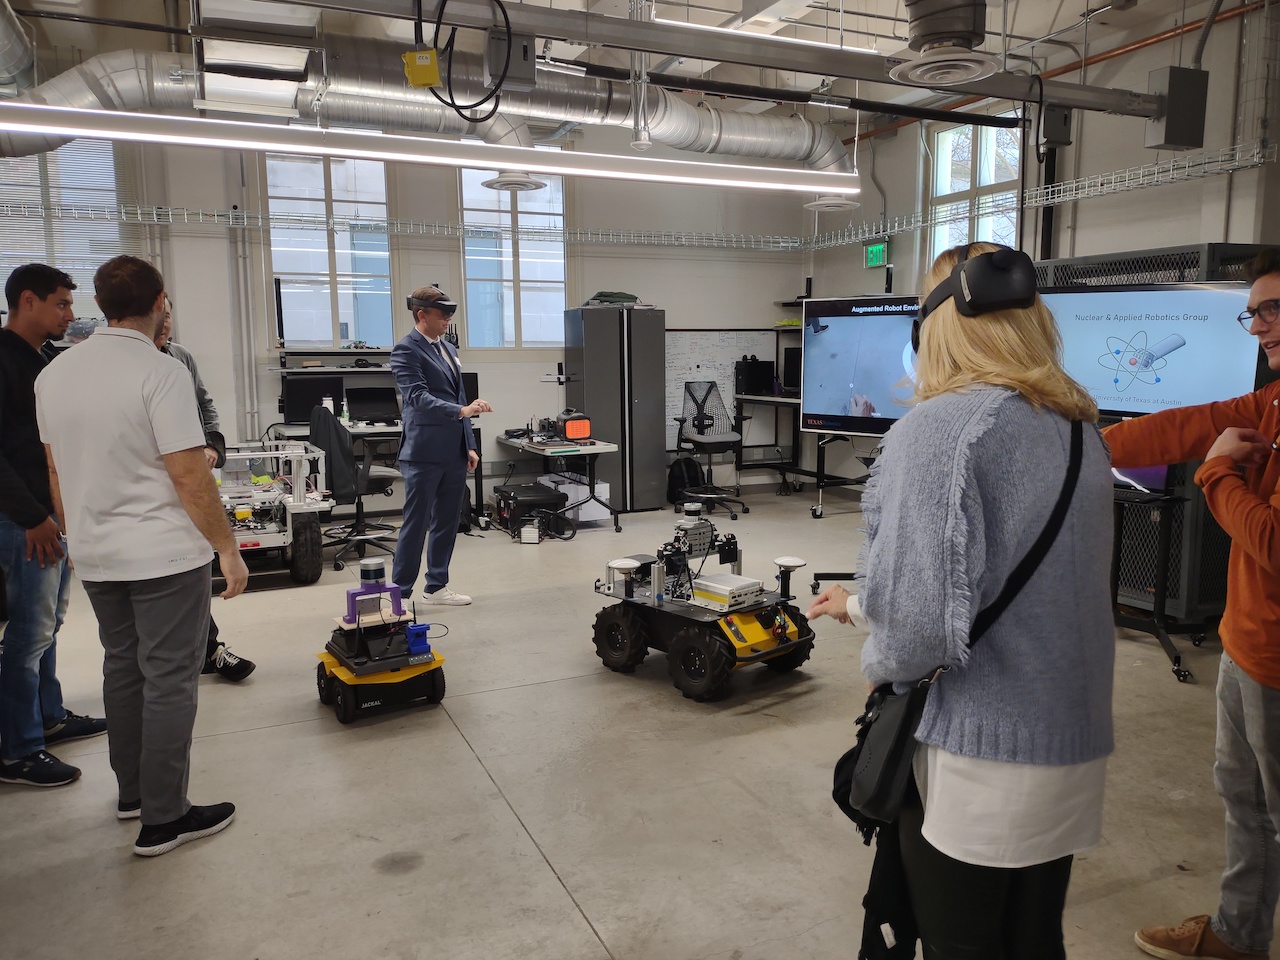 IBA members focus their efforts in UT’s research focus areas of Health and Well-Being, Energy and Environment, and Technology and Society. Here, members use VR to pilot cars with assistance from Texas Robotics students and faculty